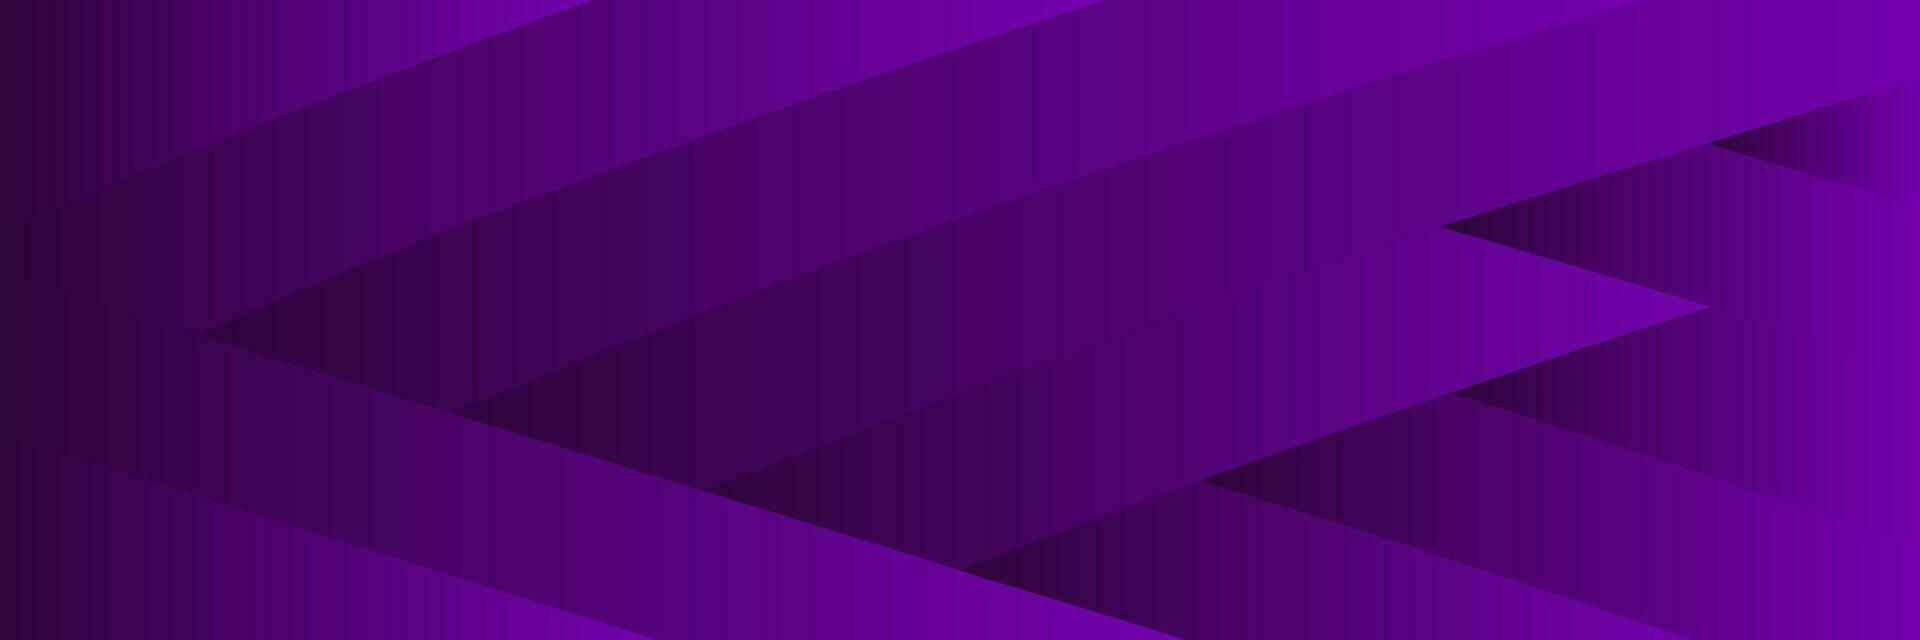 abstract elegant Purper helling achtergrond vector